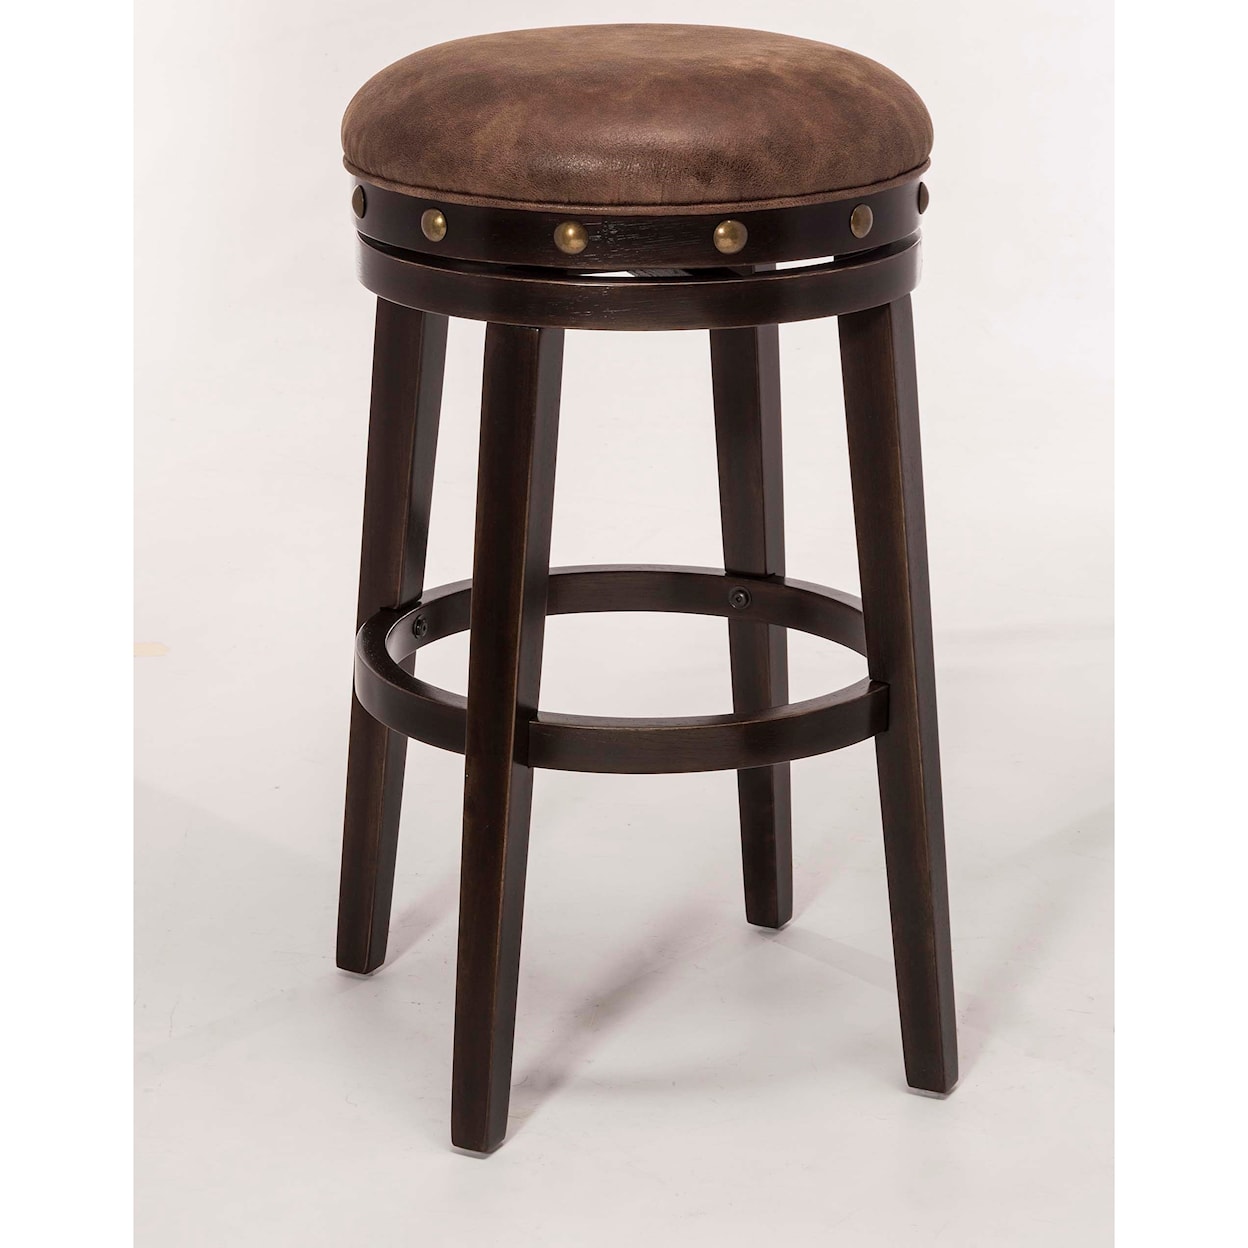 Hillsdale Backless Bar Stools Backless Counter Stool